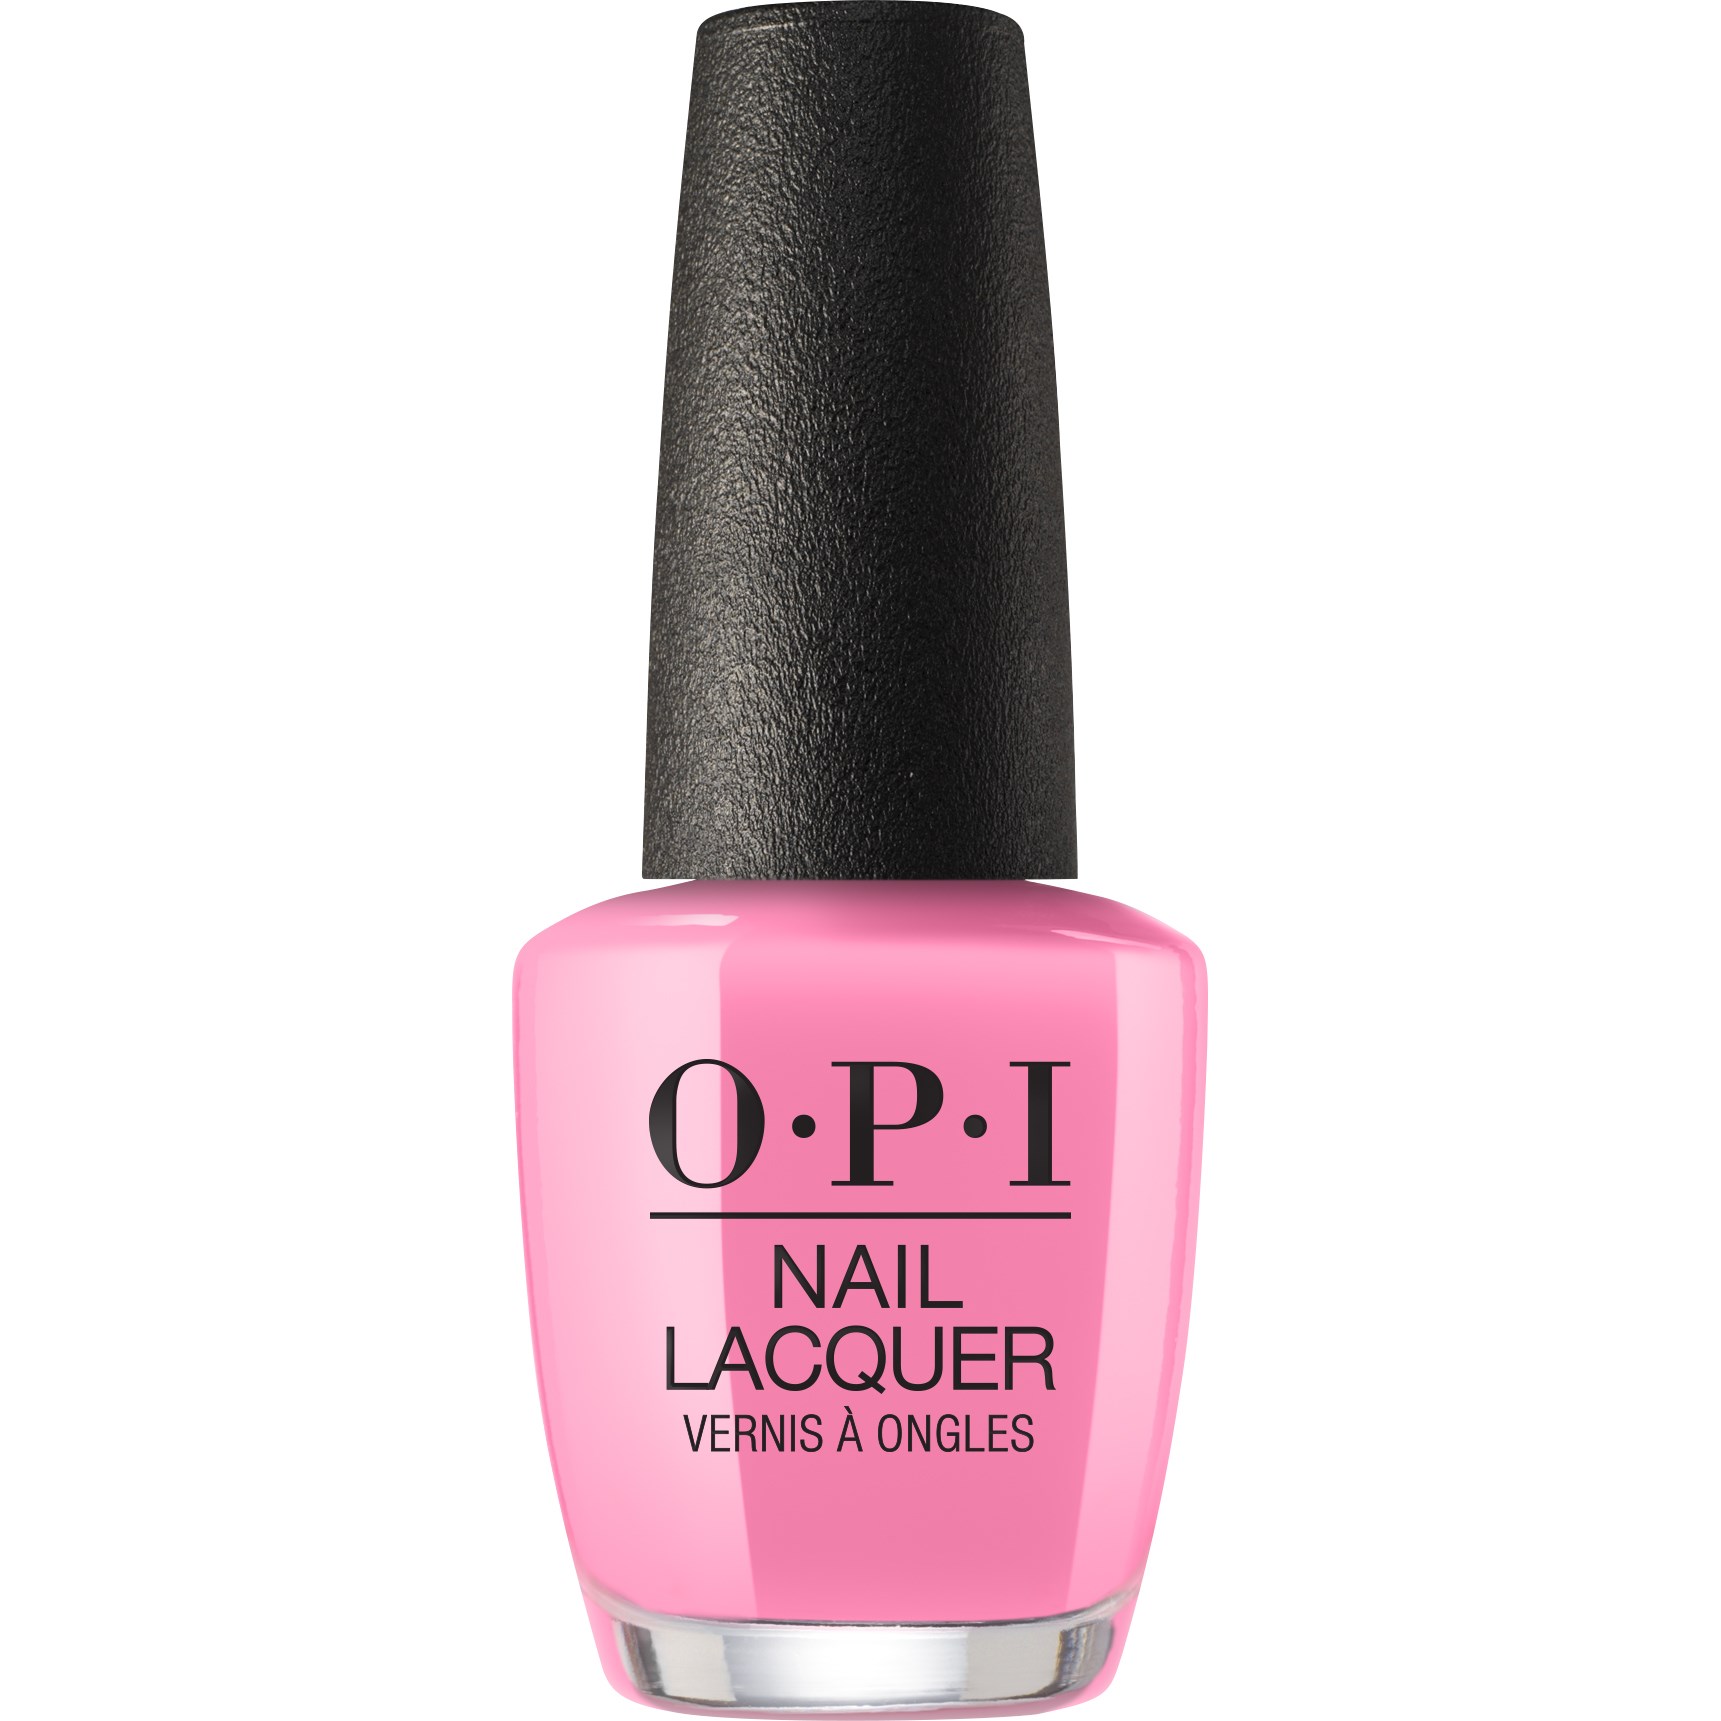 OPI Nail Lacquer Peru Lima Tell You About This Color!